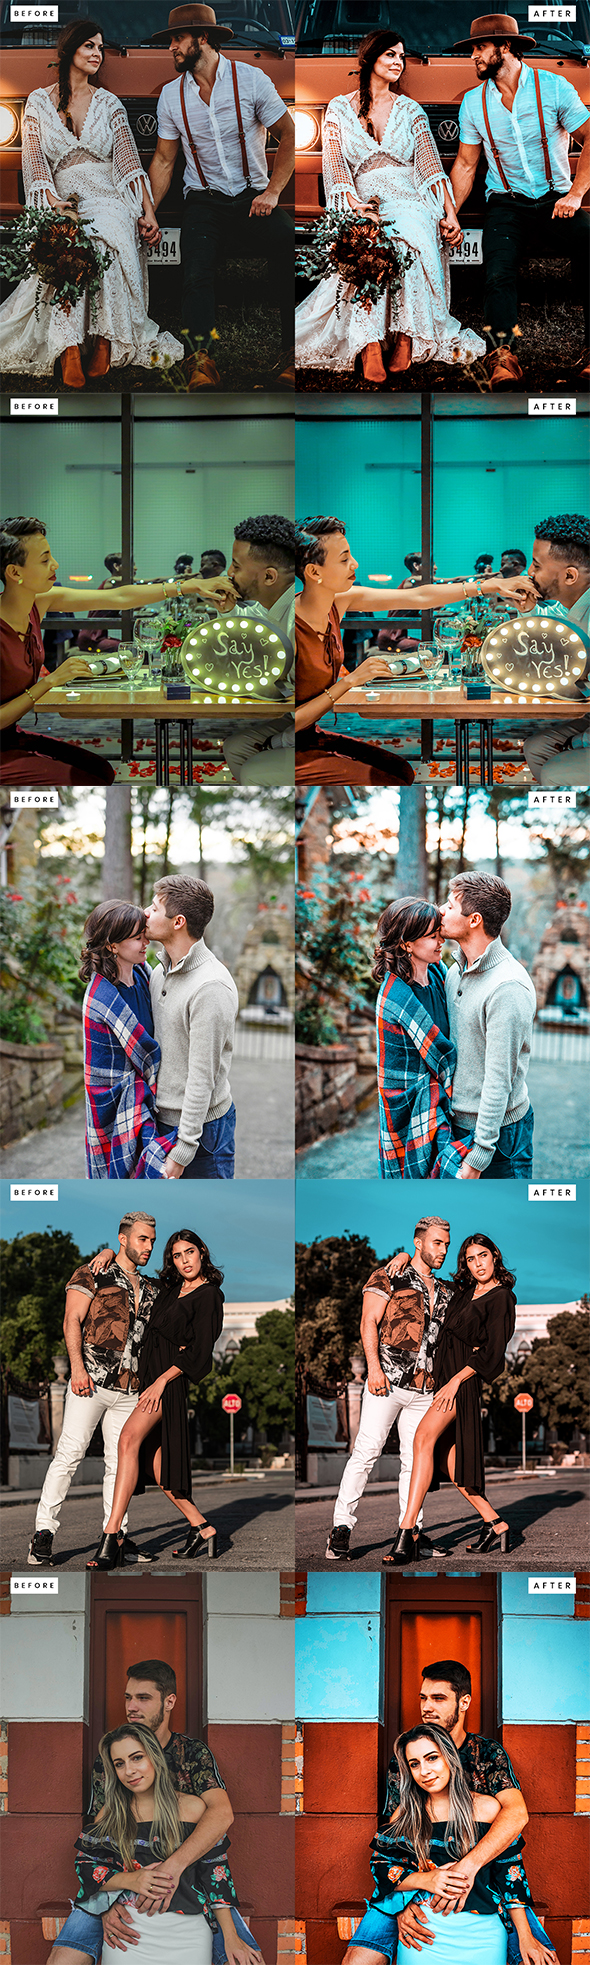 [DOWNLOAD]Insta romantic Photo Effects